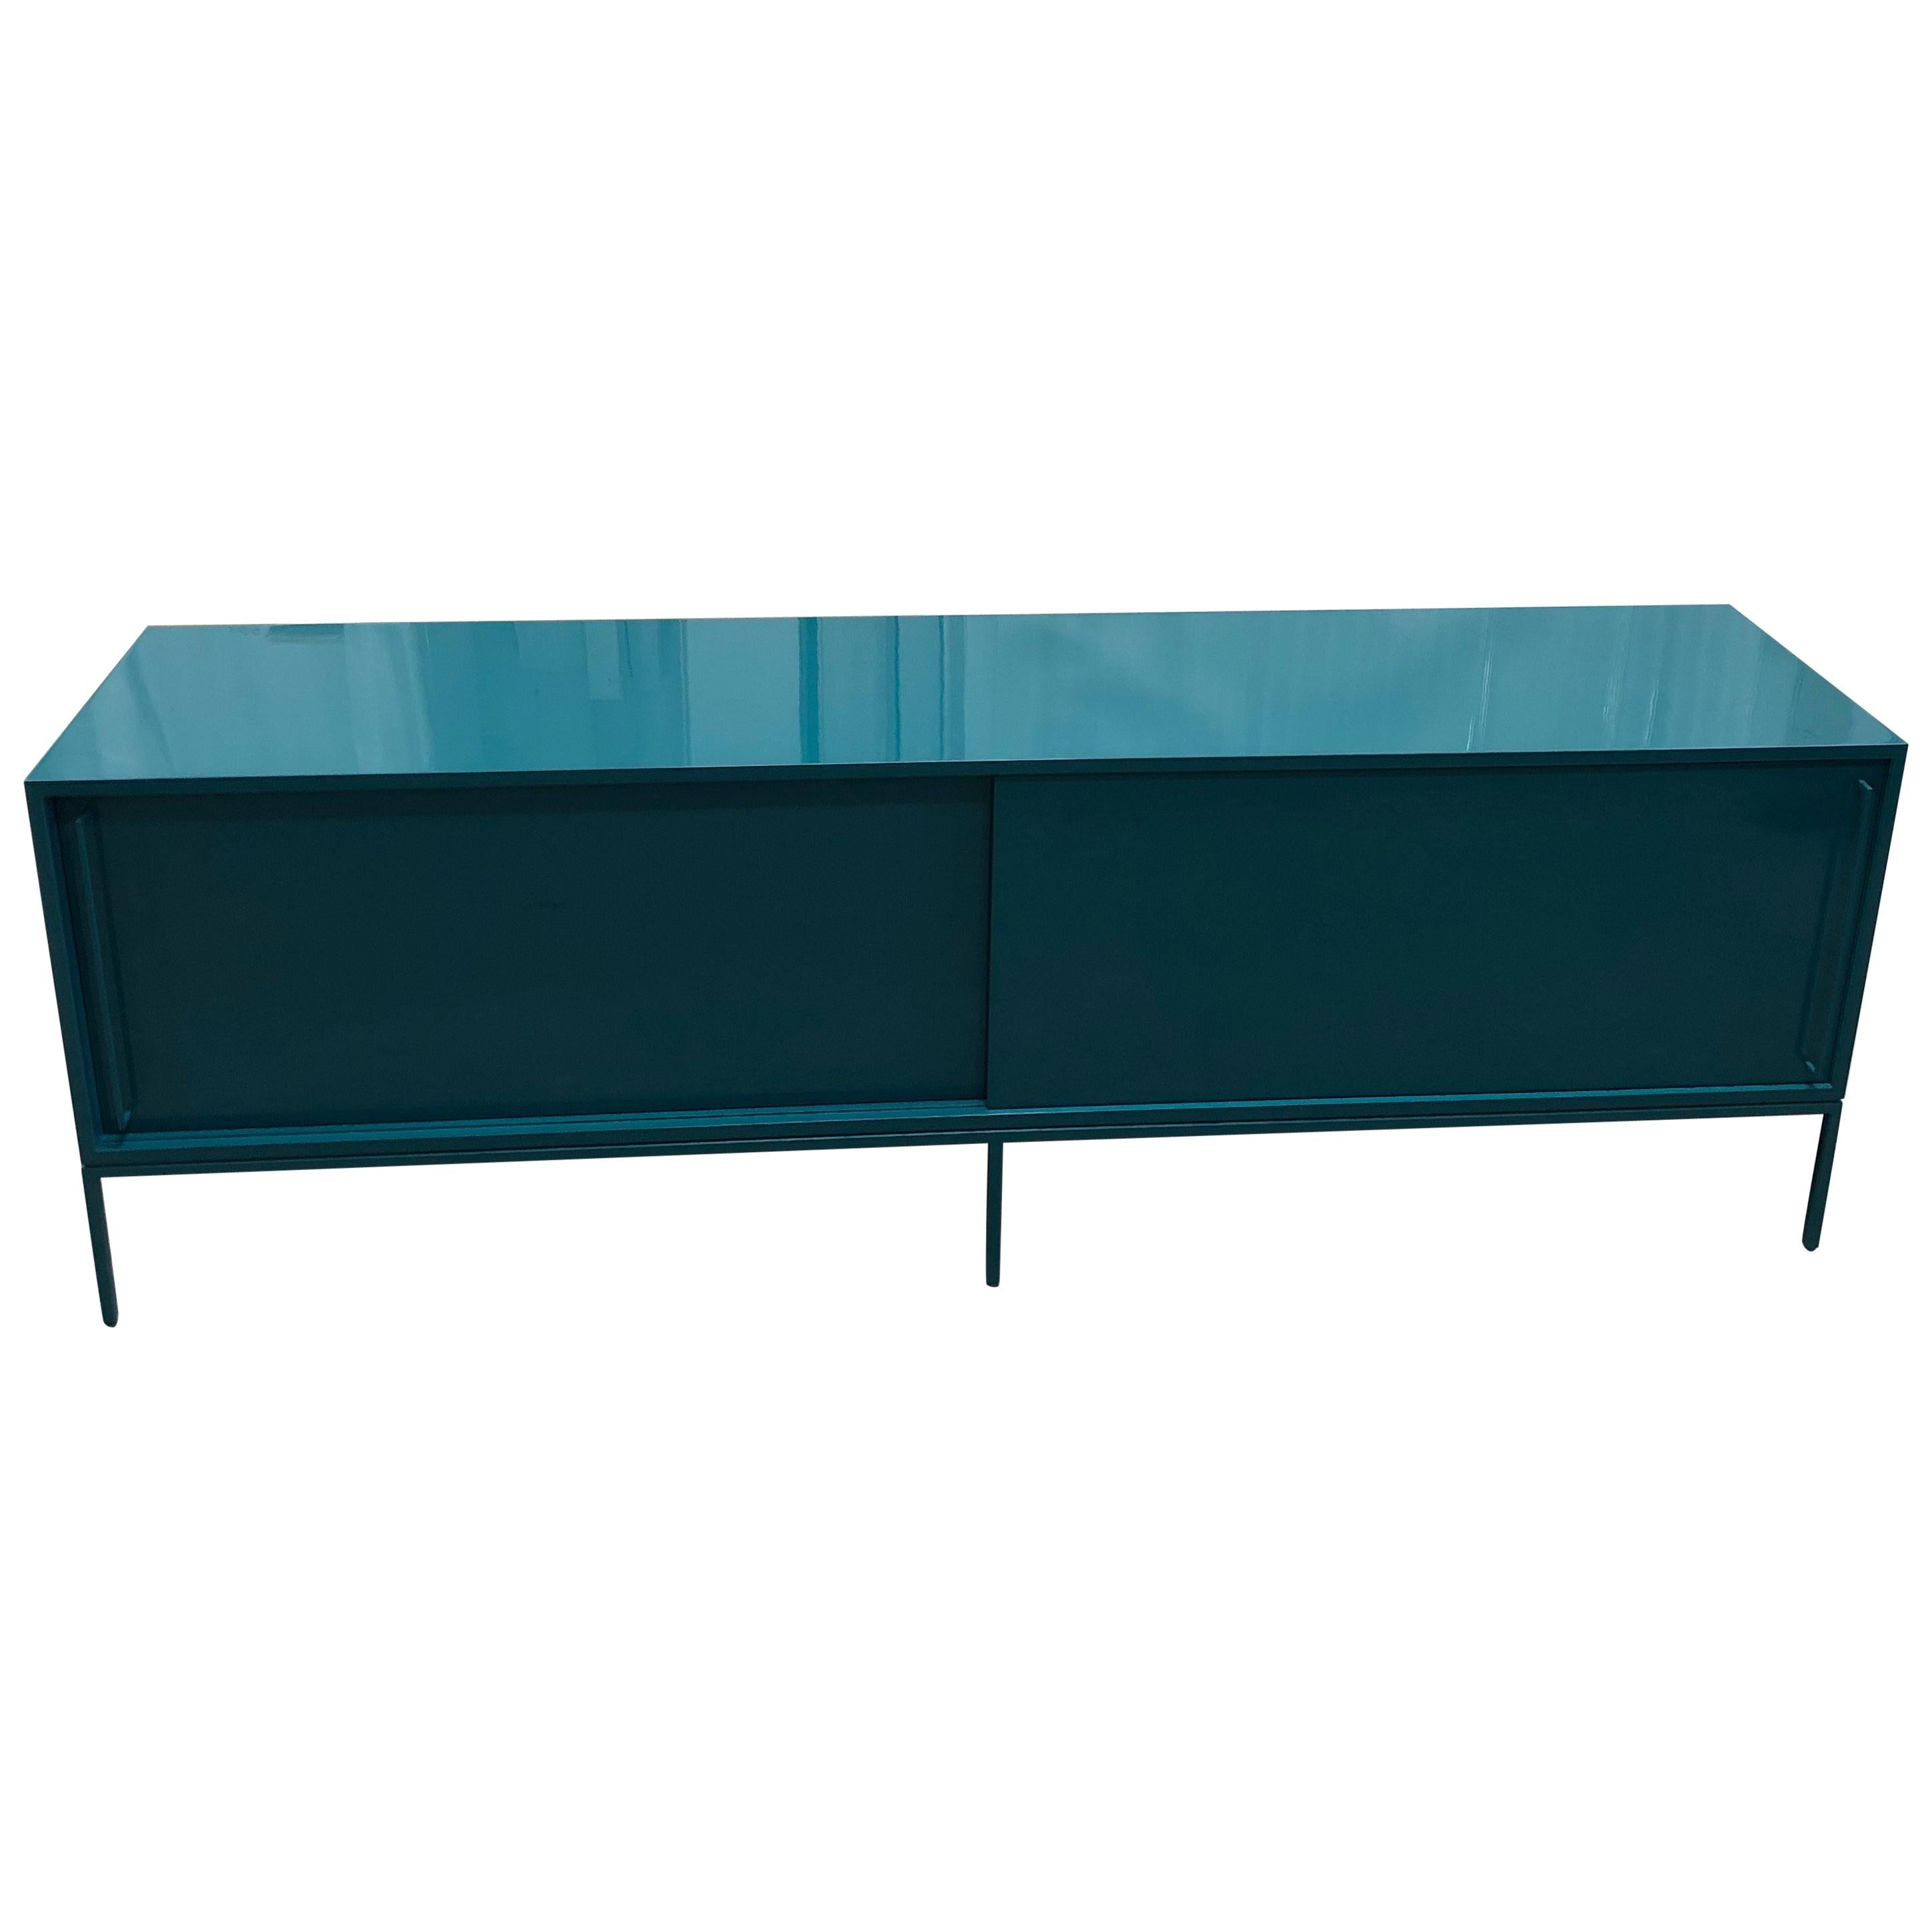 Re: 379 Credenza in Buffed Lacquered Finish